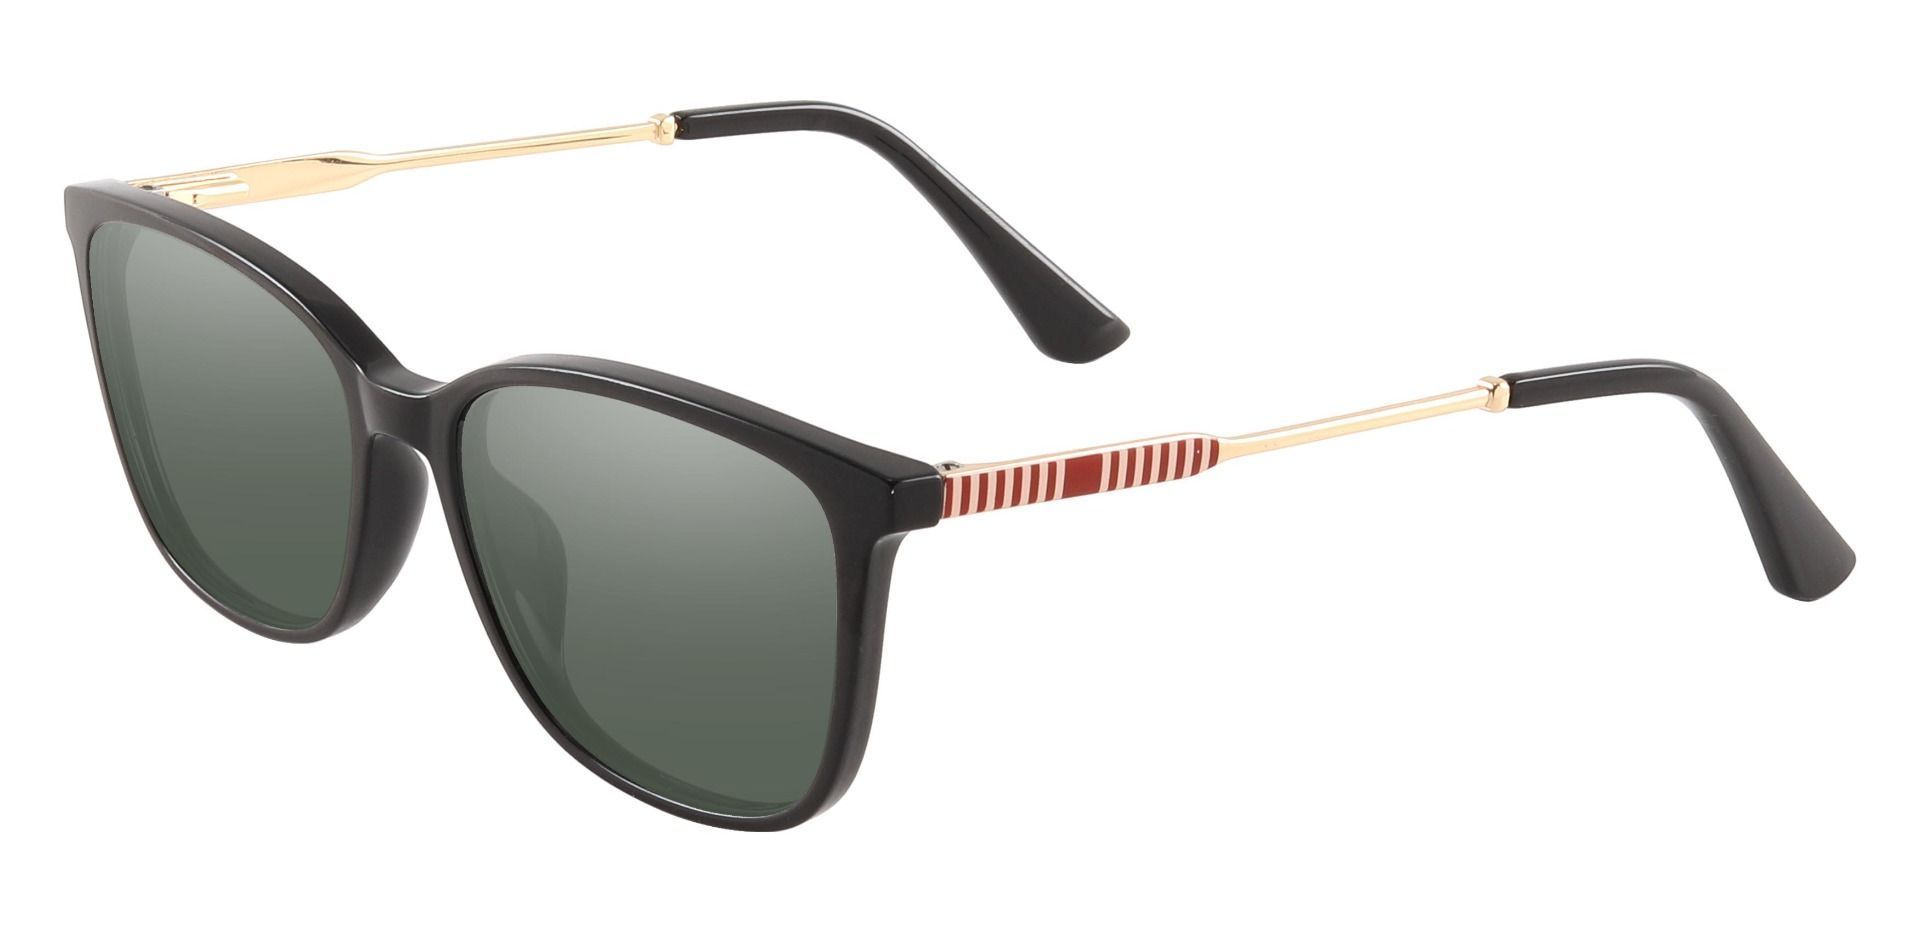 Miami Rectangle Reading Sunglasses - Black Frame With Green Lenses